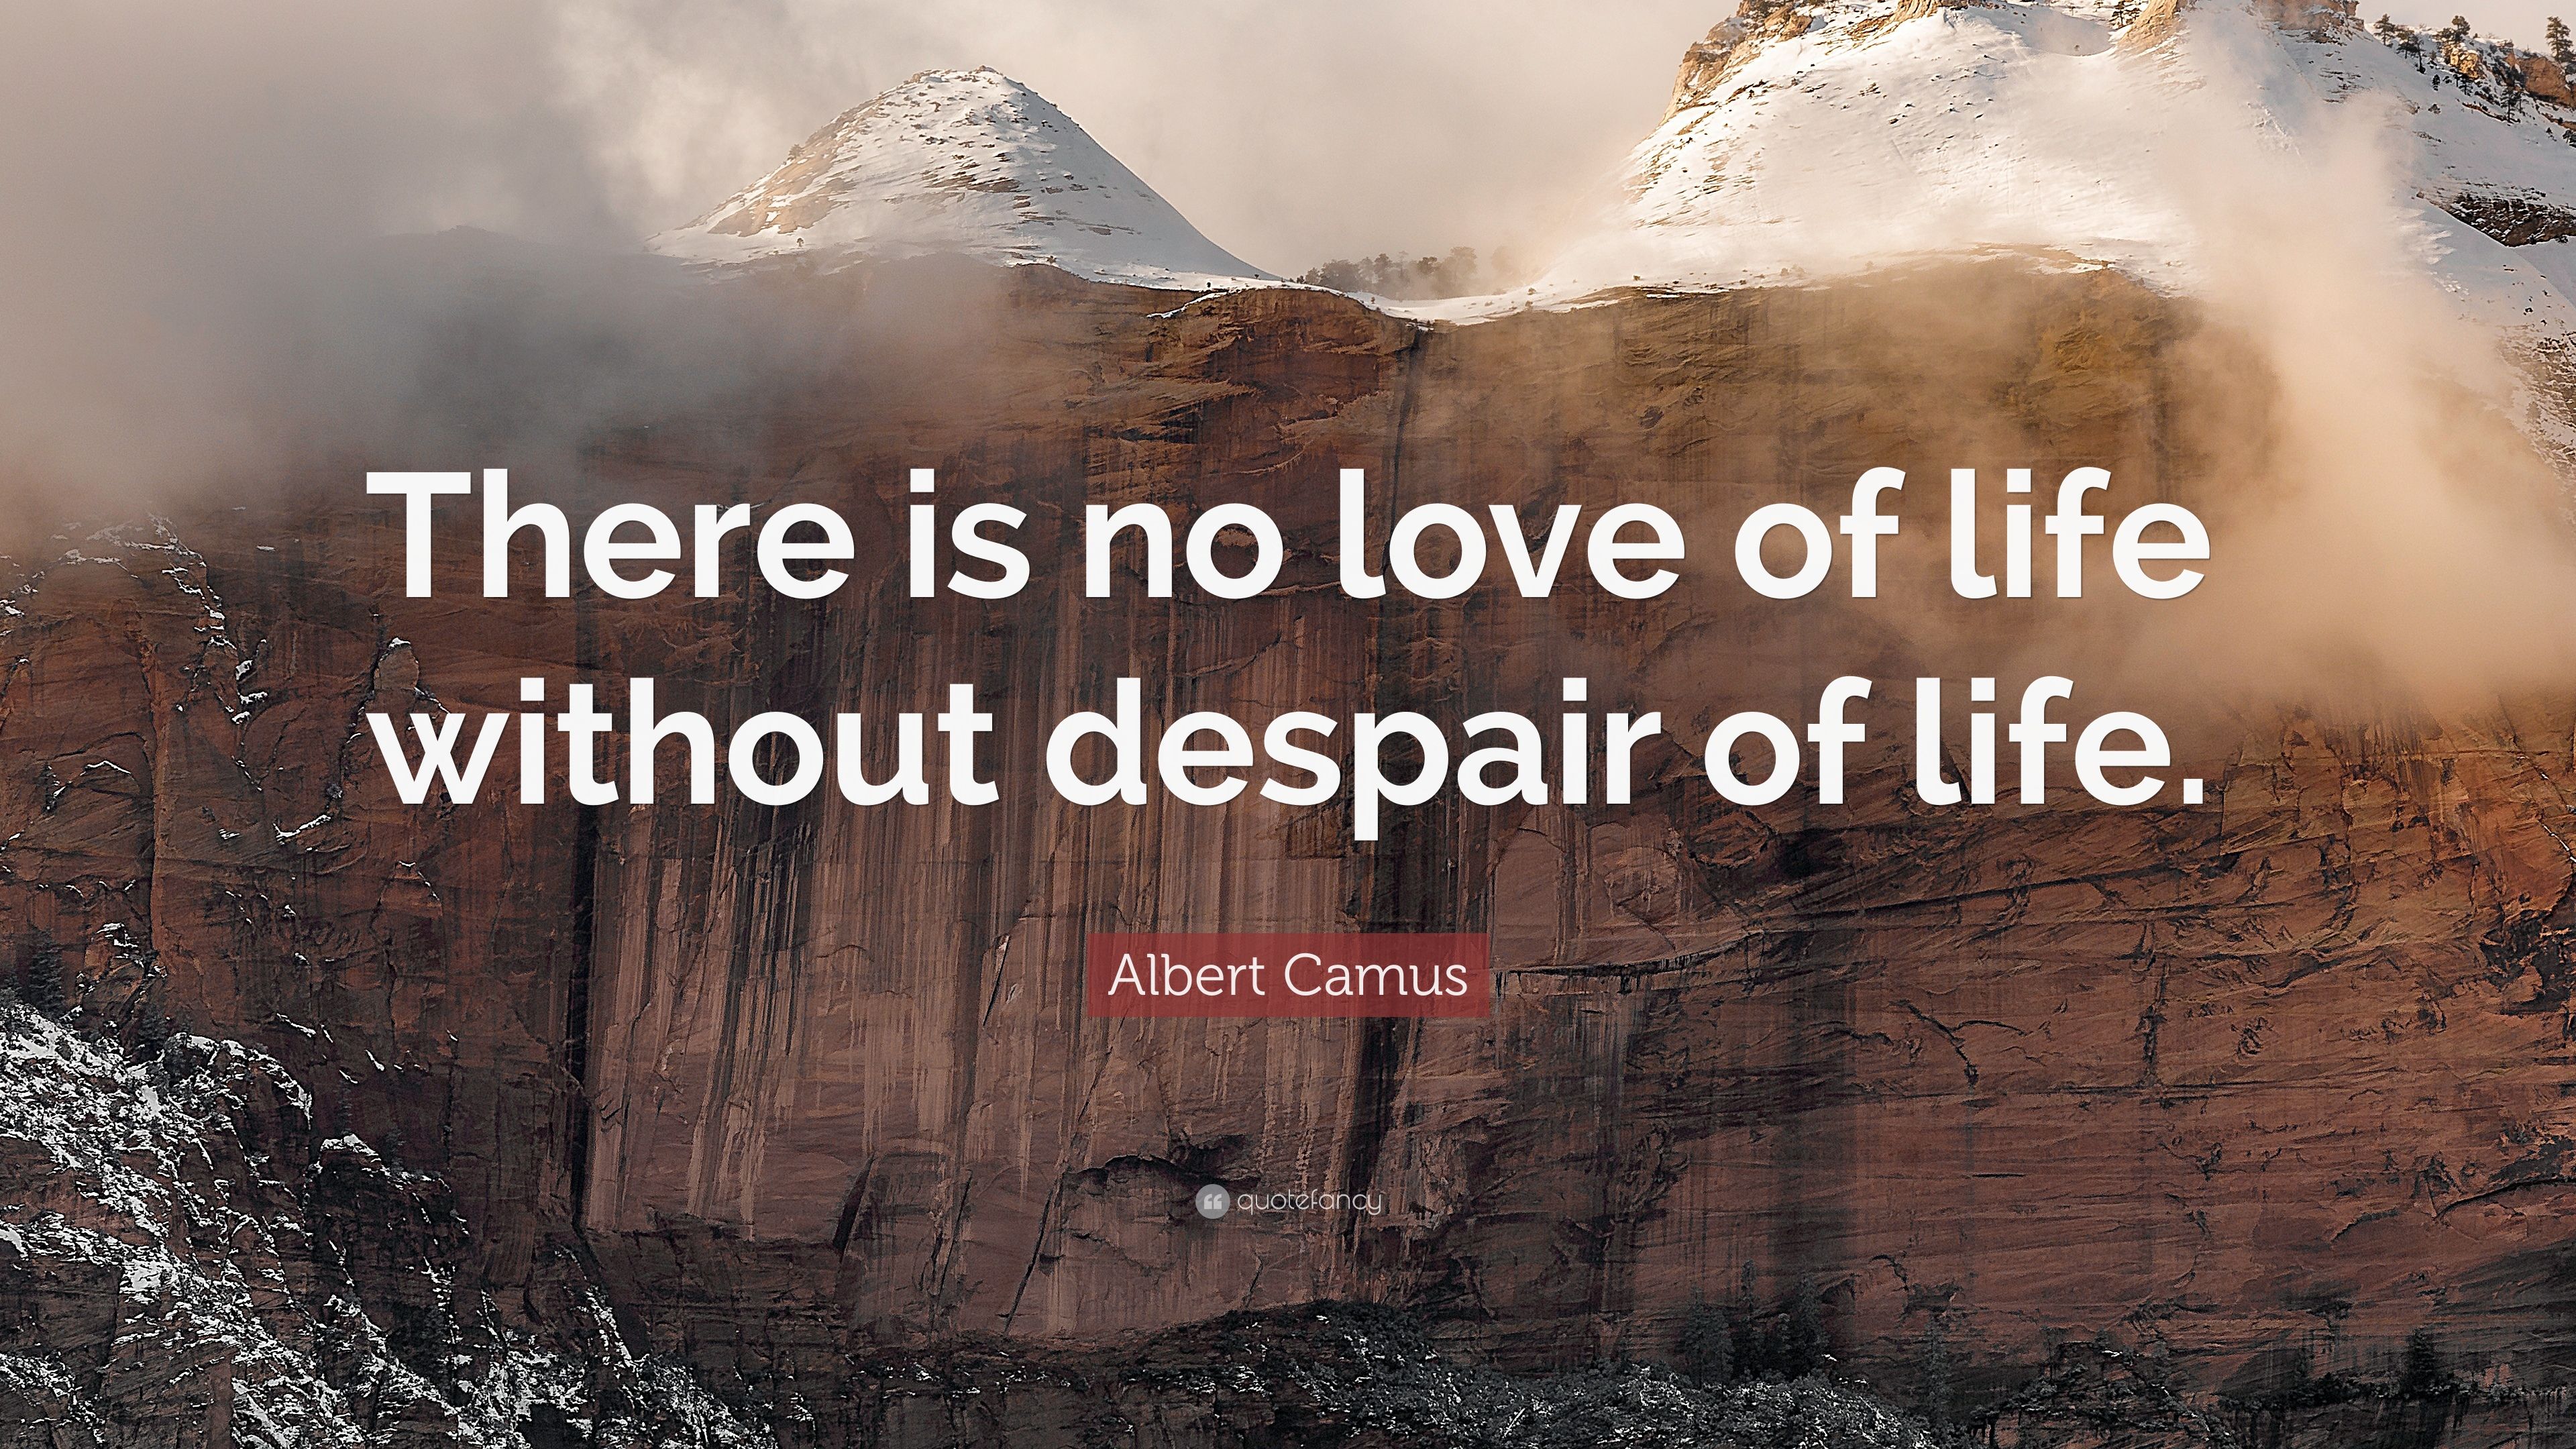 Albert Camus Quote: “There is no love of life without despair